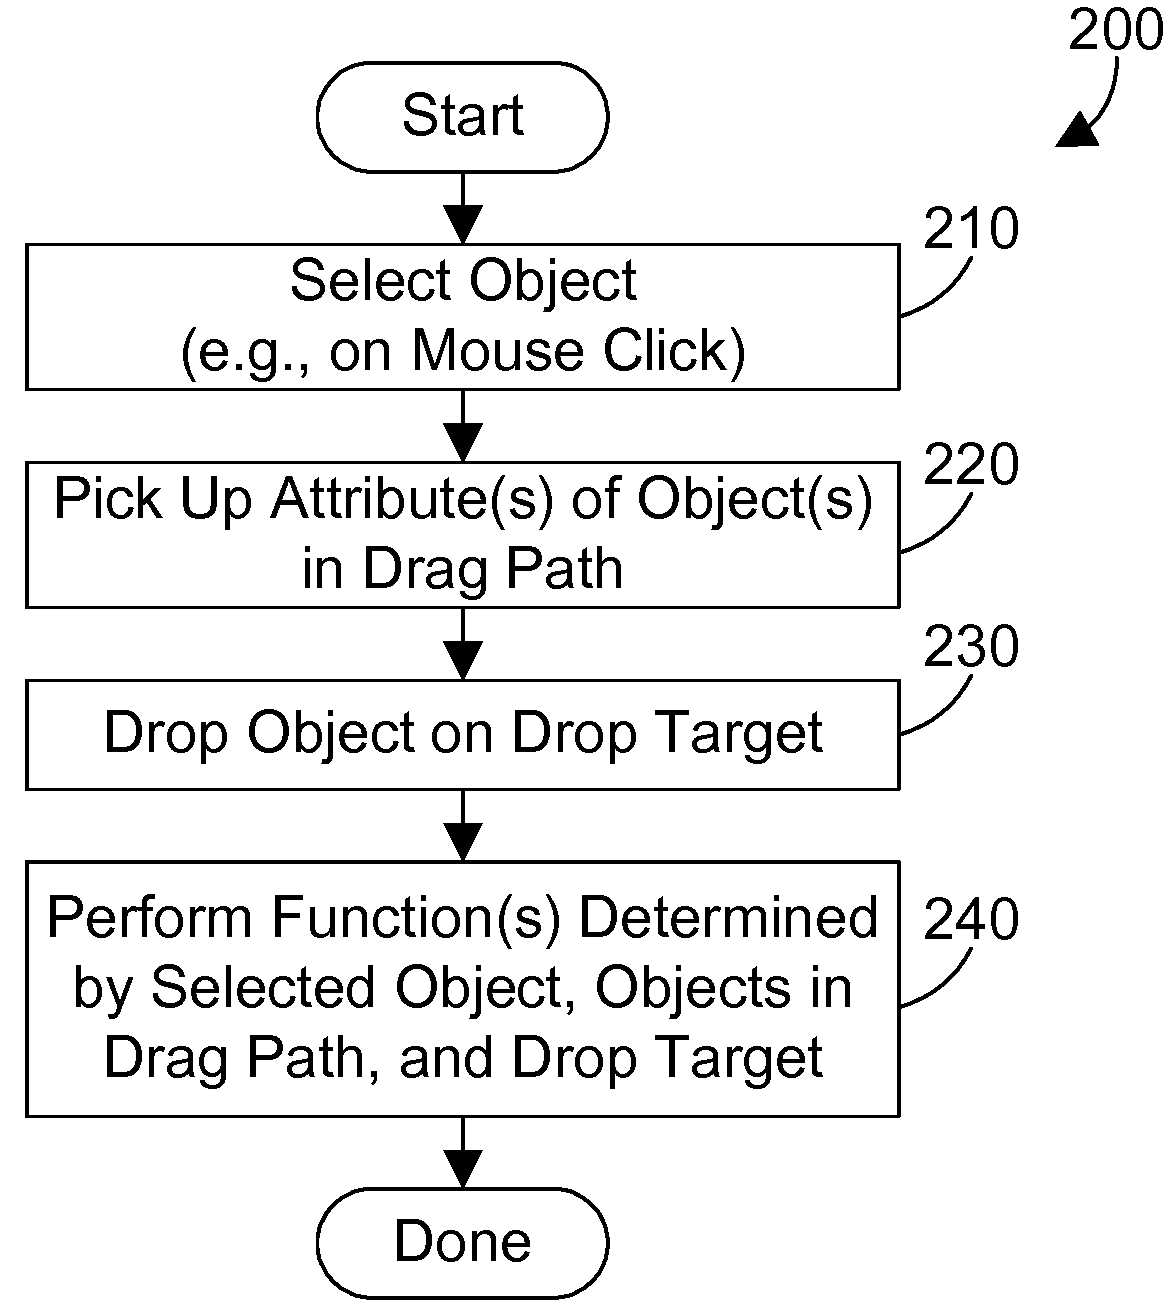 Pointer drag path operations